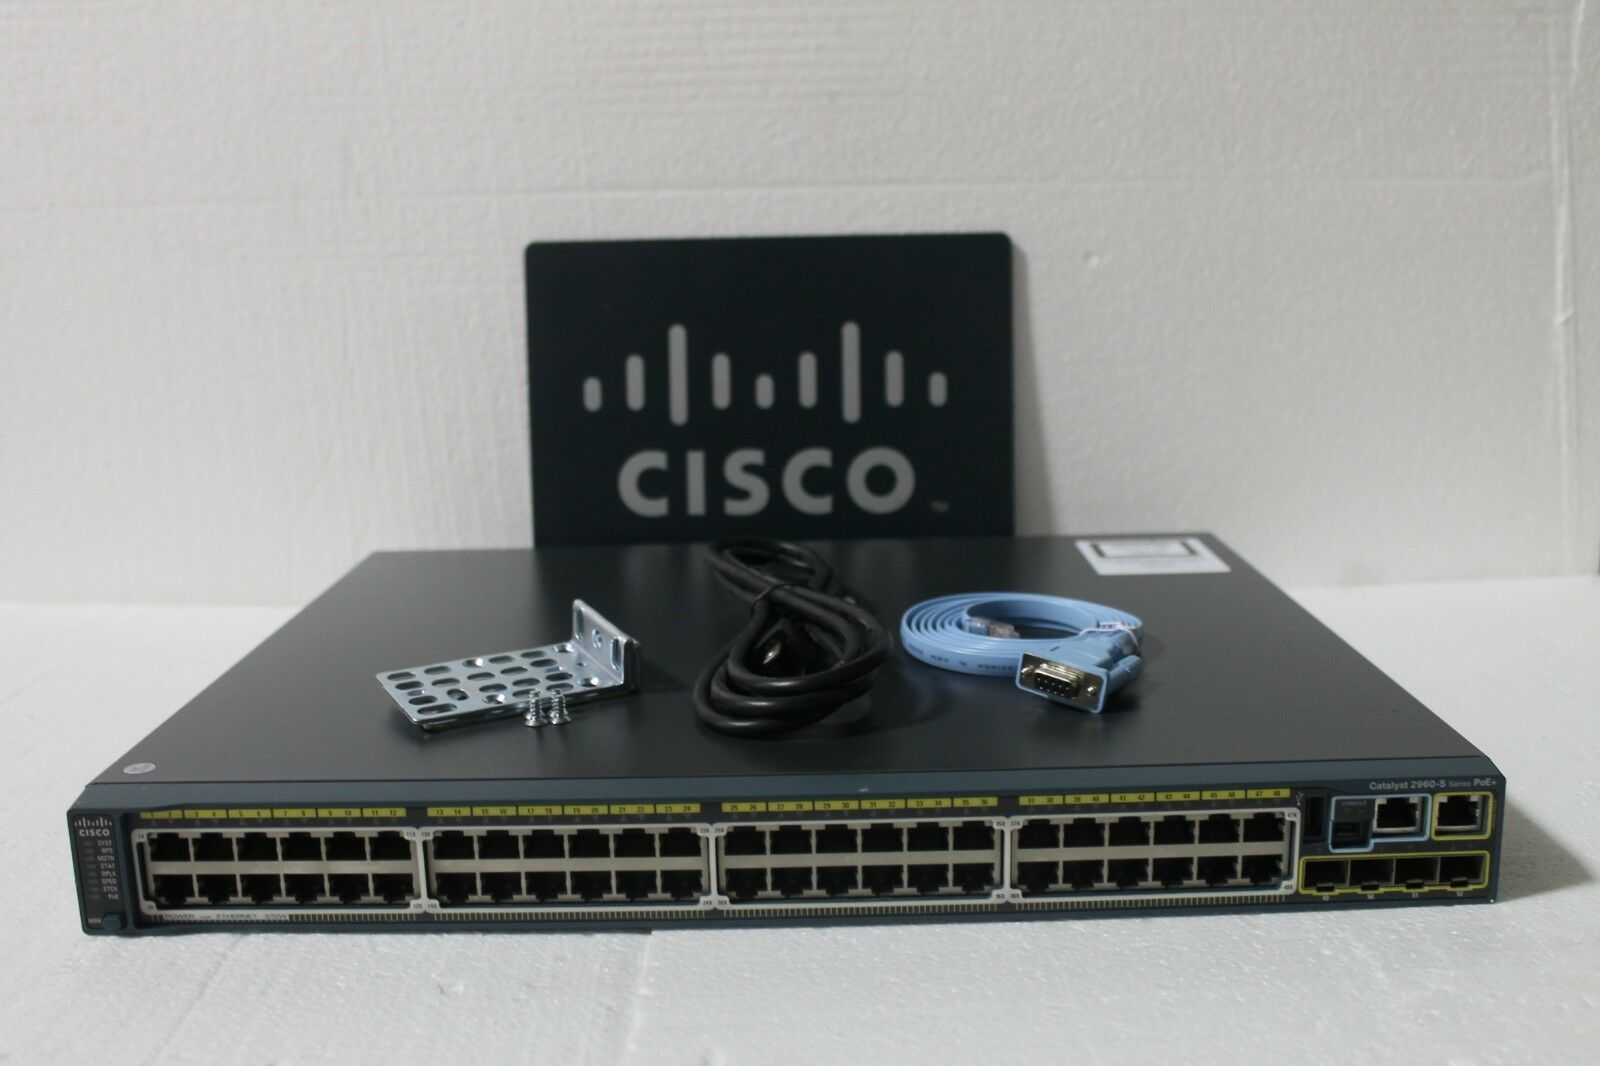 Cisco Ws-c2960s-48lps-l Catalyst 2960s Switch 48 Gige-poe 370w 4xsfp & Stack